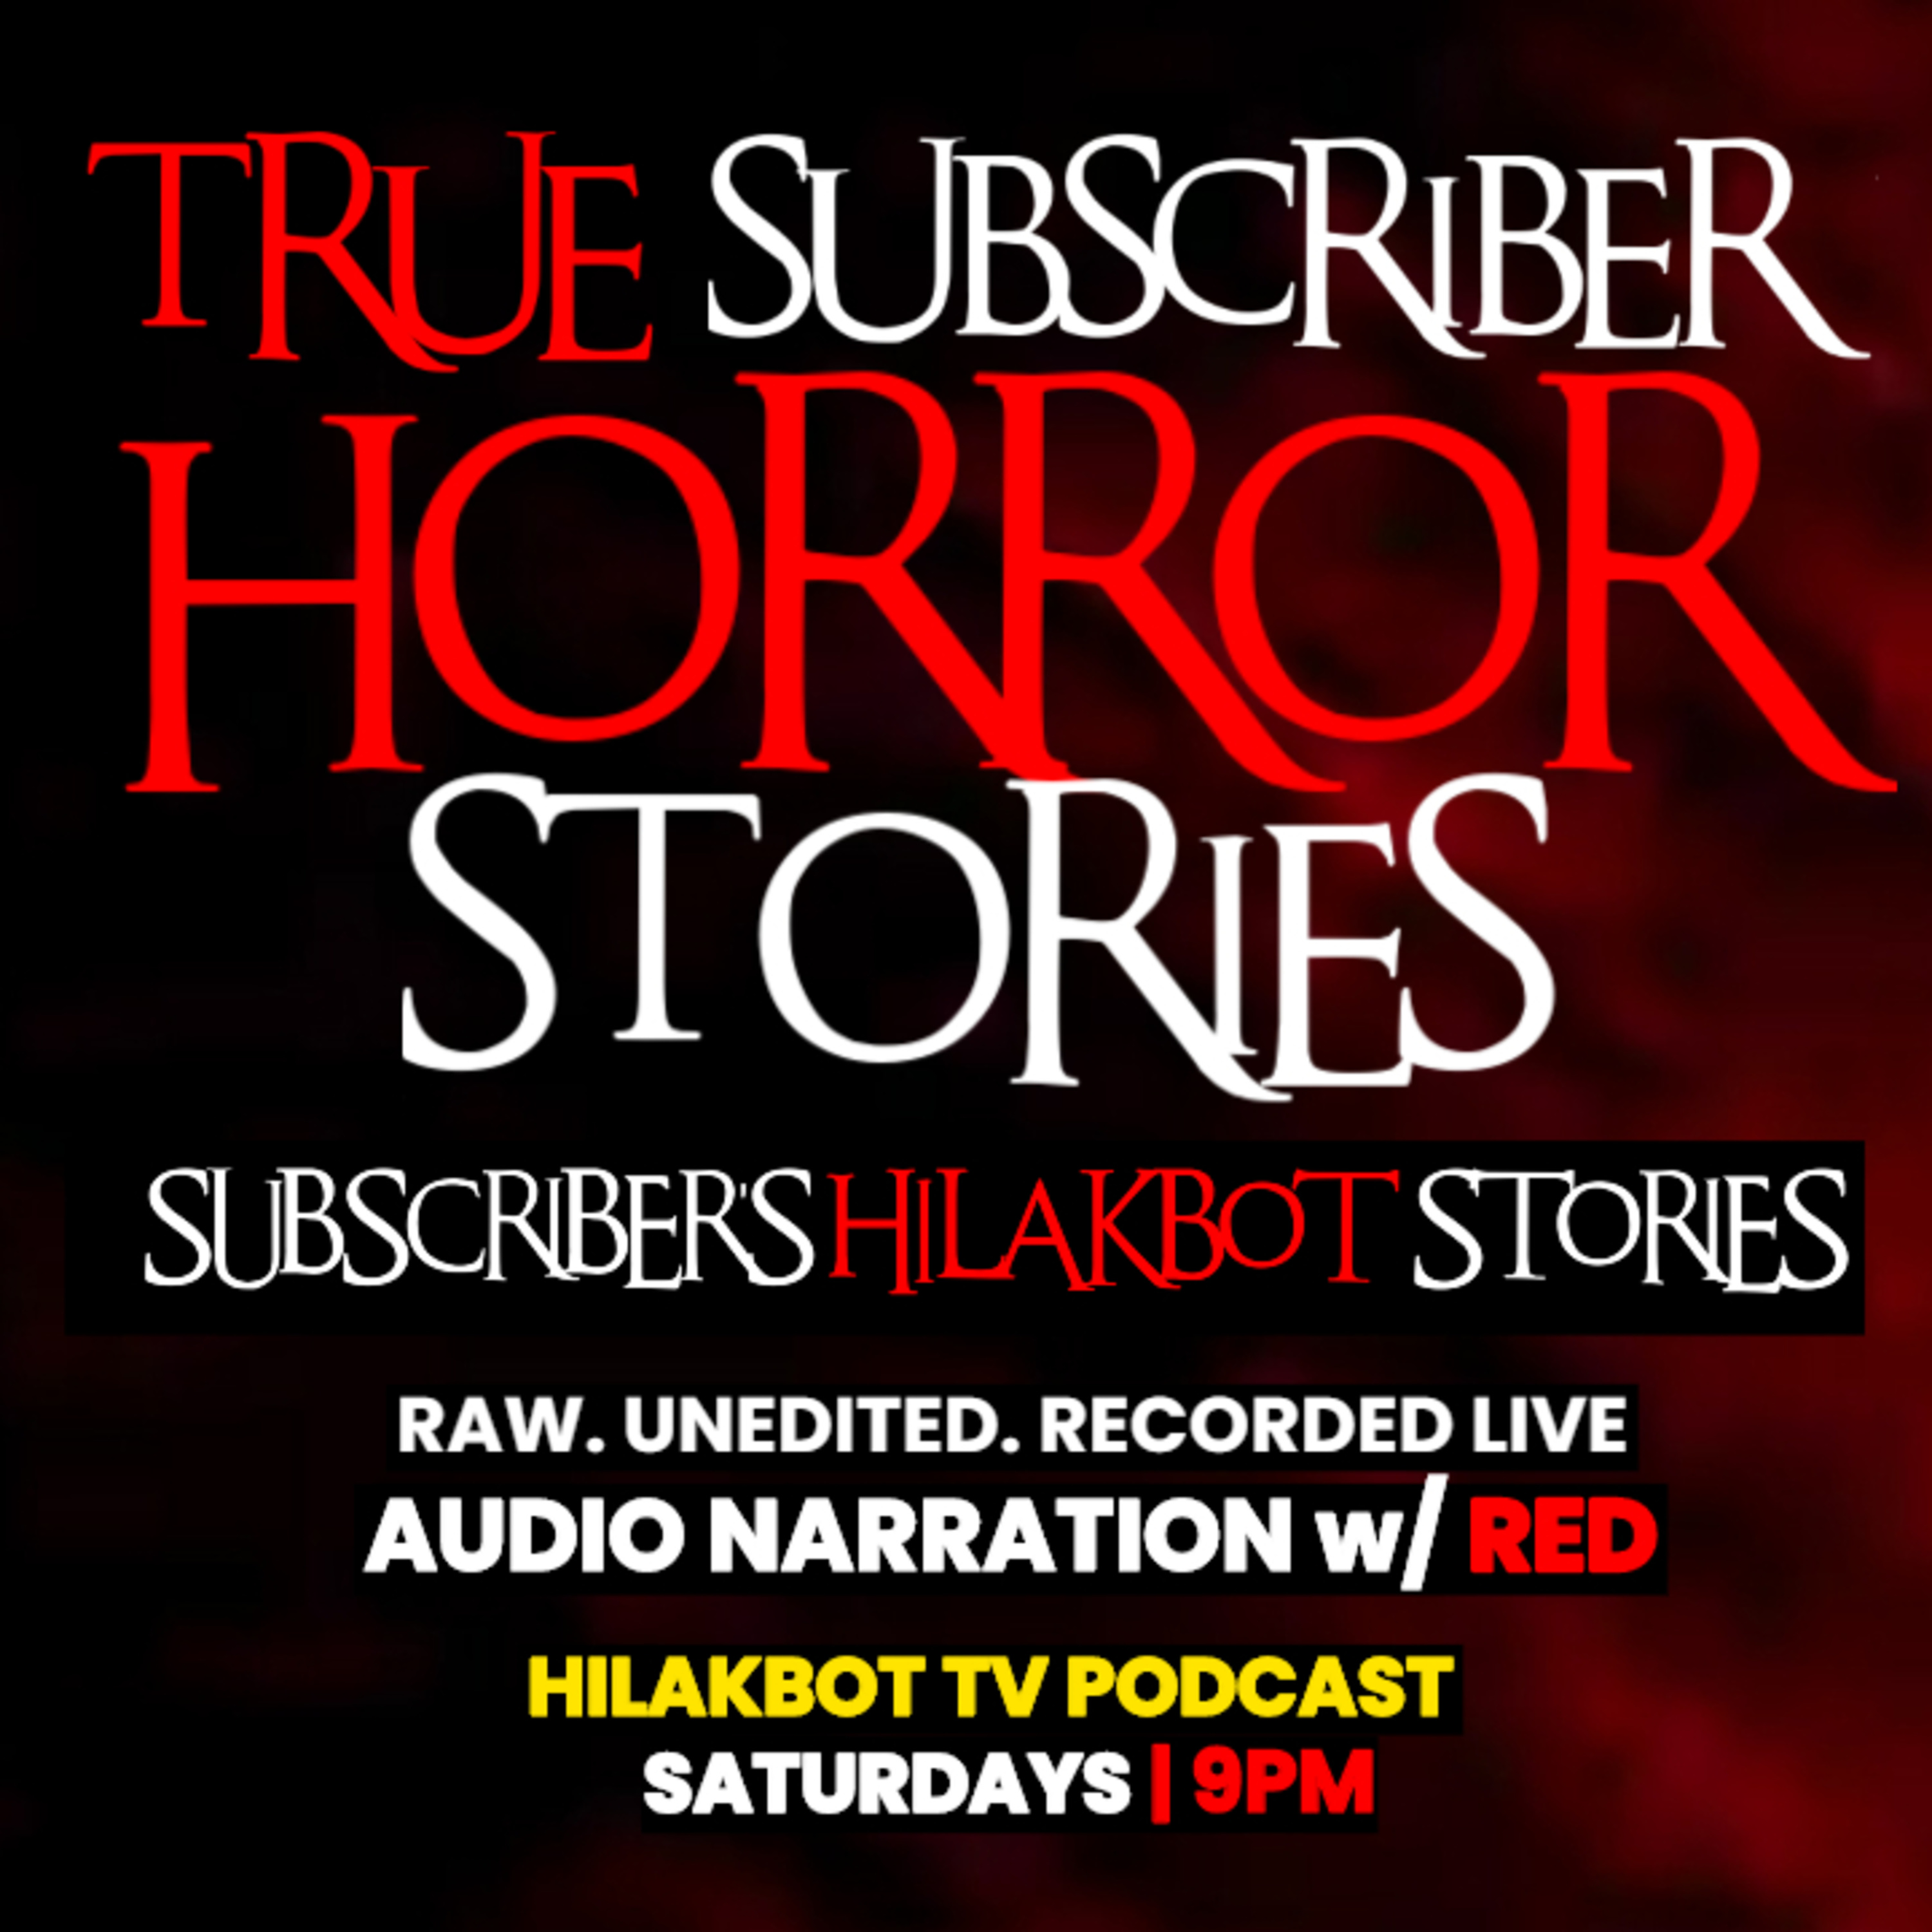 SUBSCRIBER'S HILAKBOT STORIES EPISODE 25 - Live Narration w/ RED | Listener's Submitted True Scary Stories